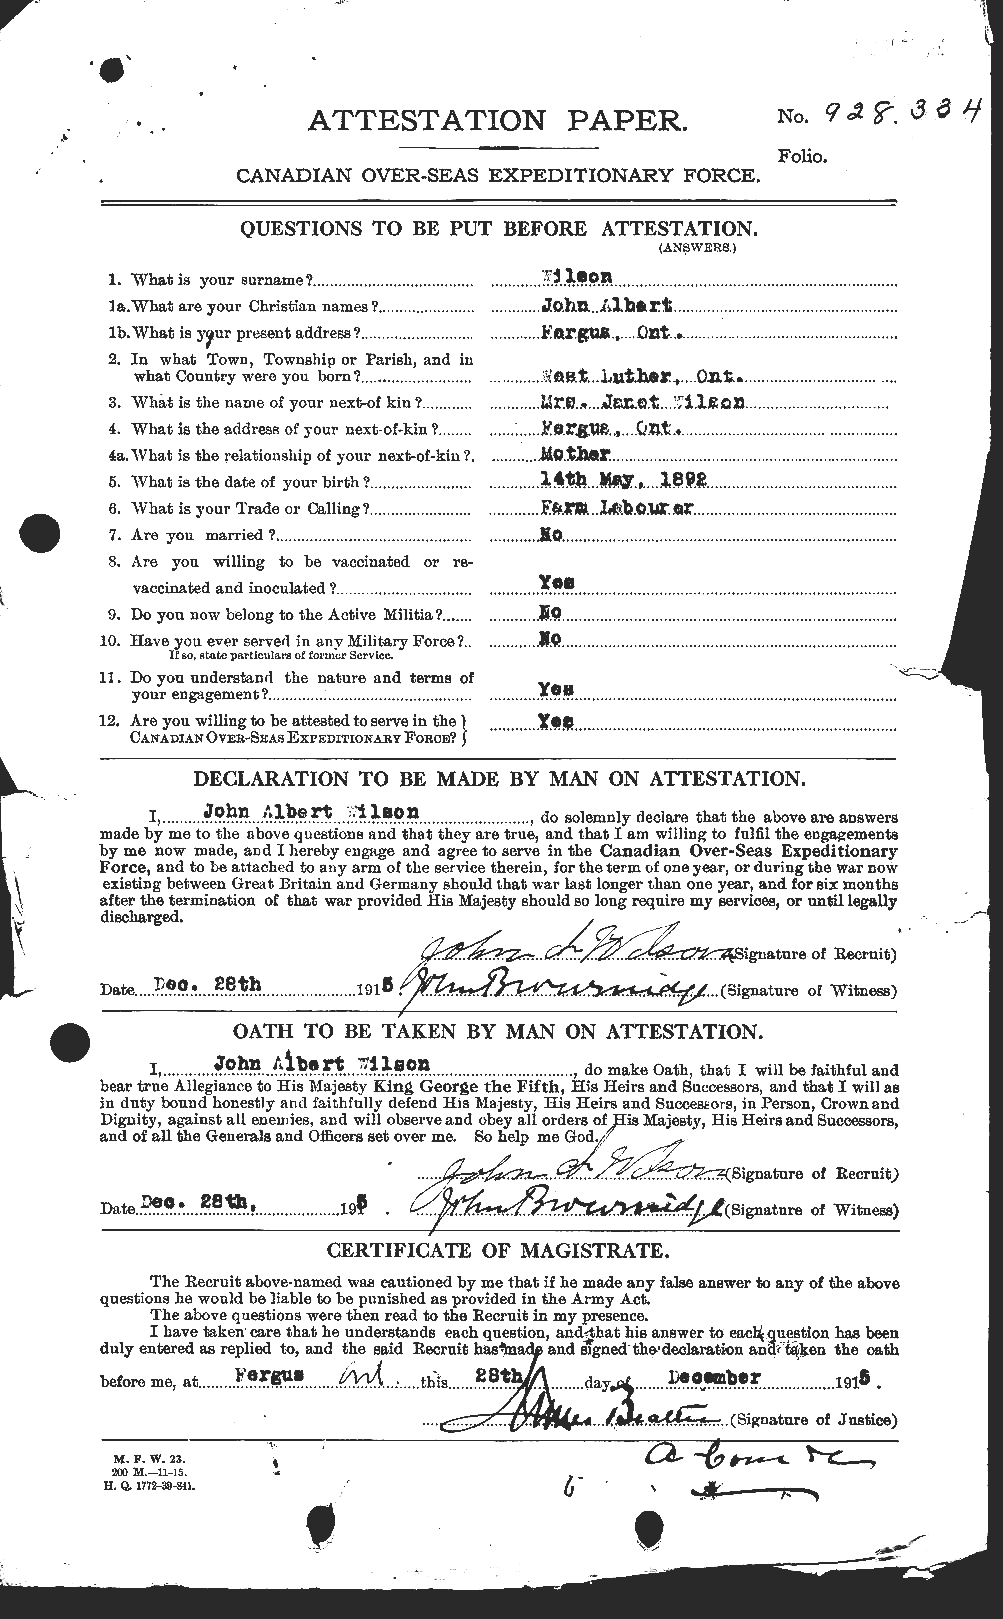 Personnel Records of the First World War - CEF 681645a